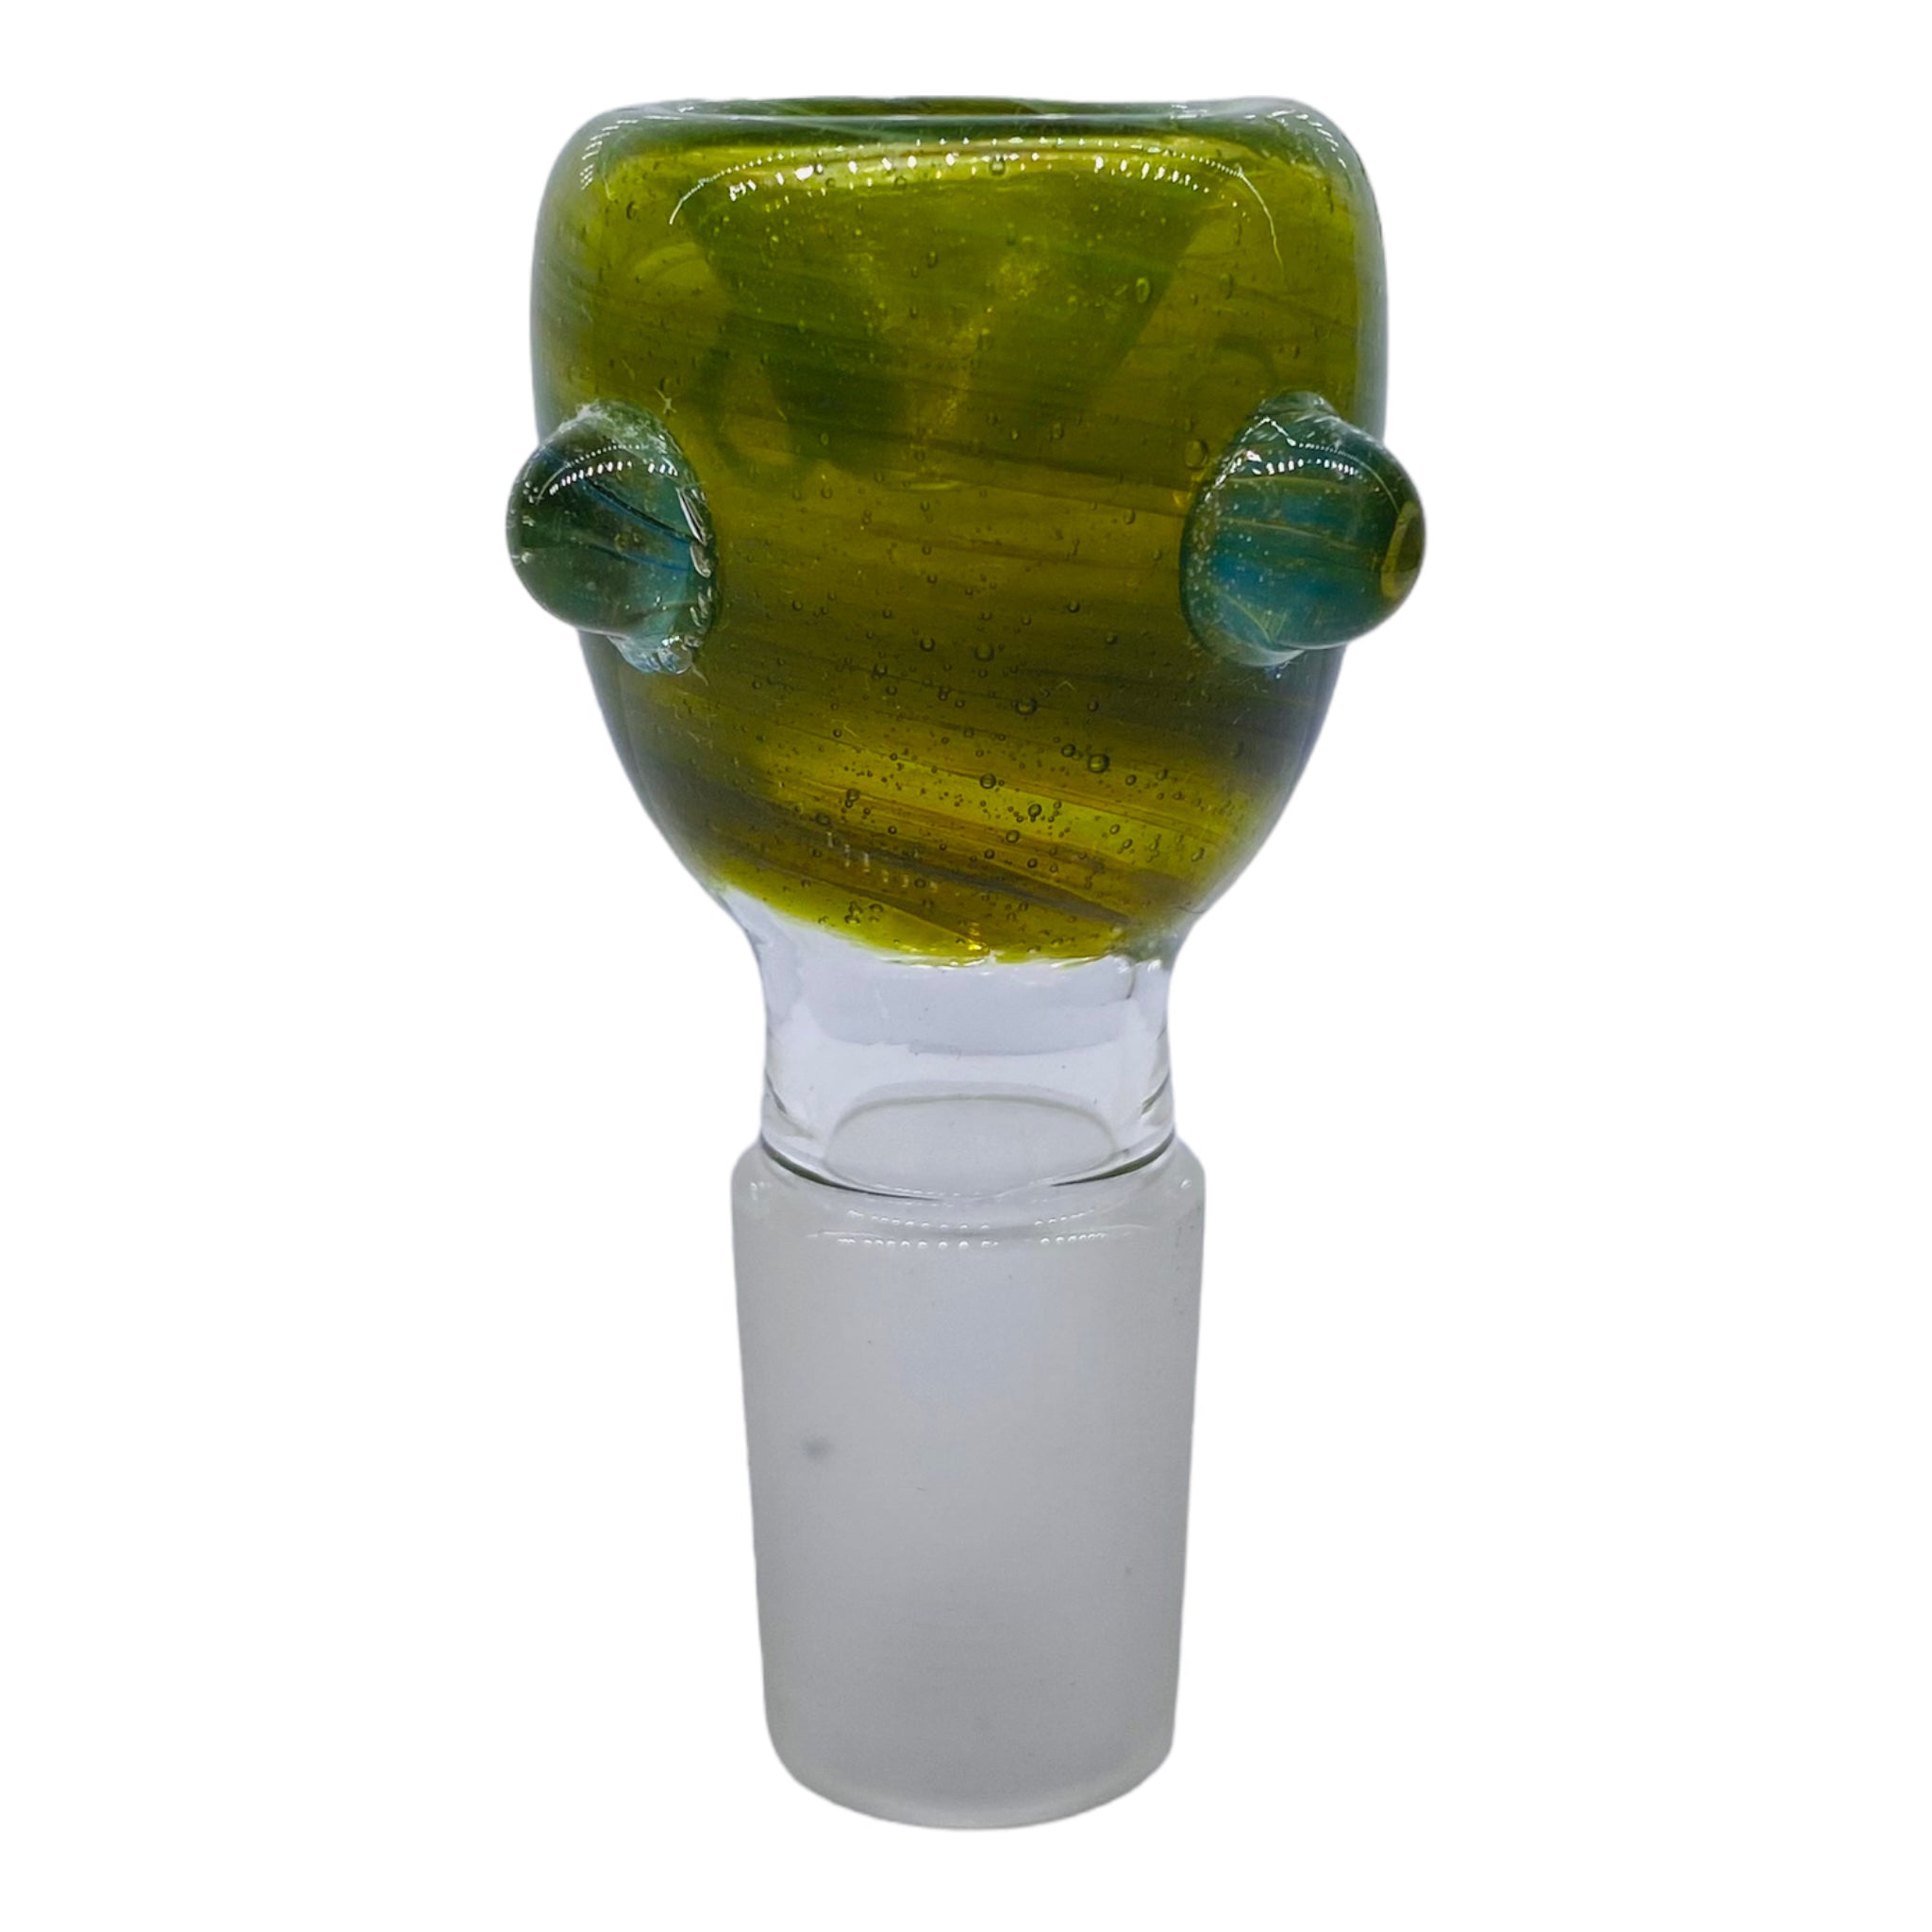 18mm Flower Bowl - Green Bubble With Blue Dots Bong Bowl Piece